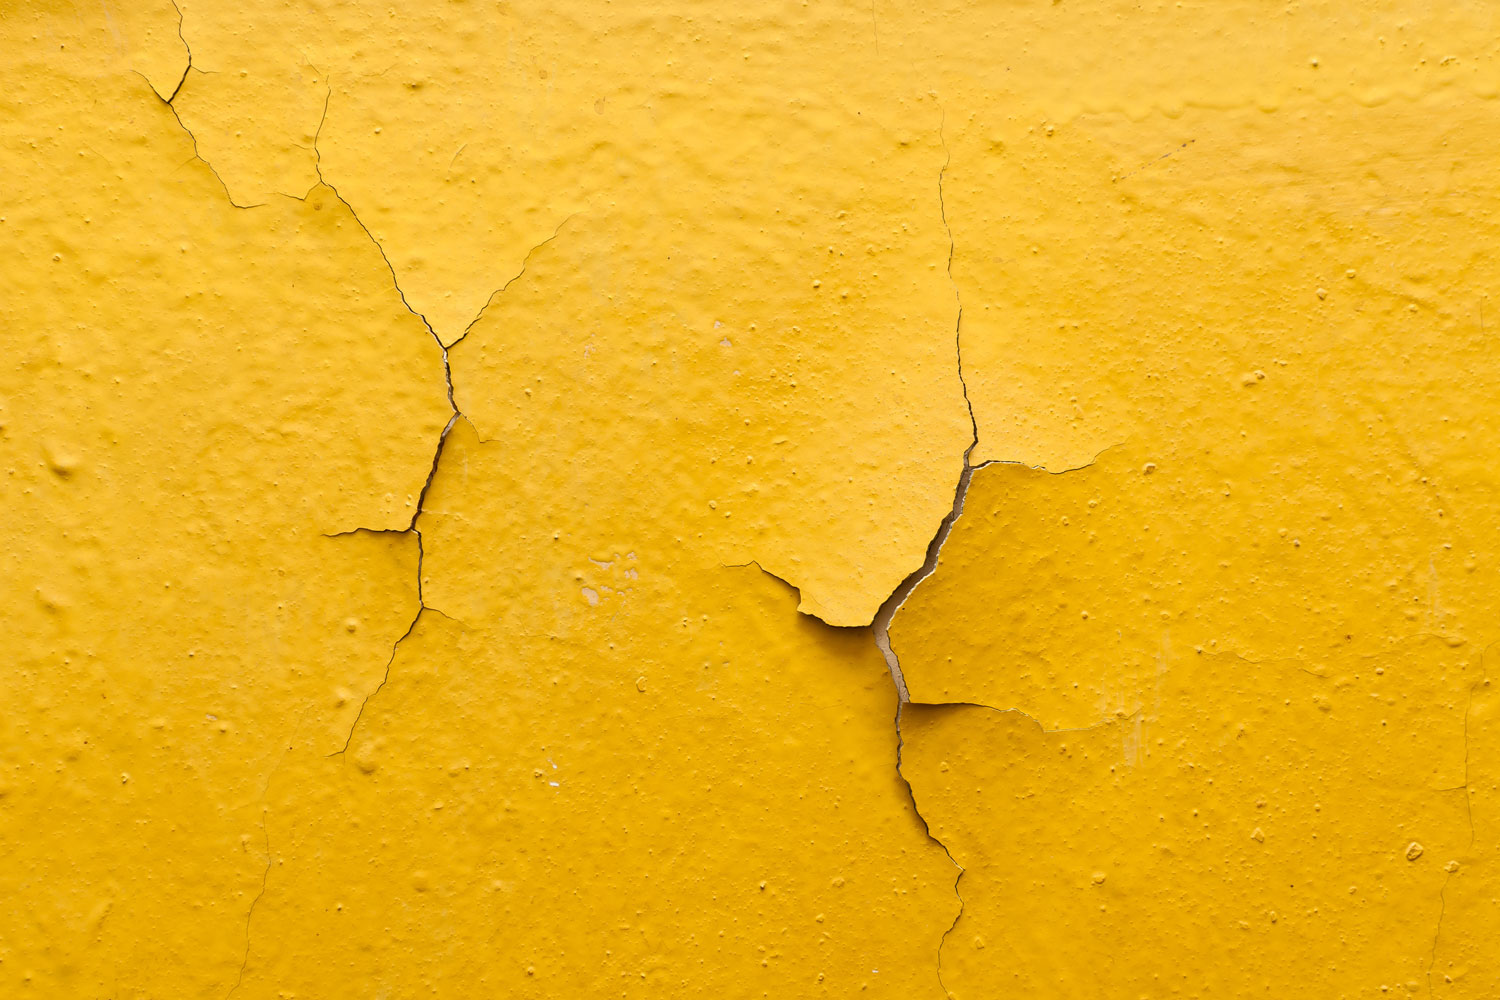 Cracked paint on a yellow wall